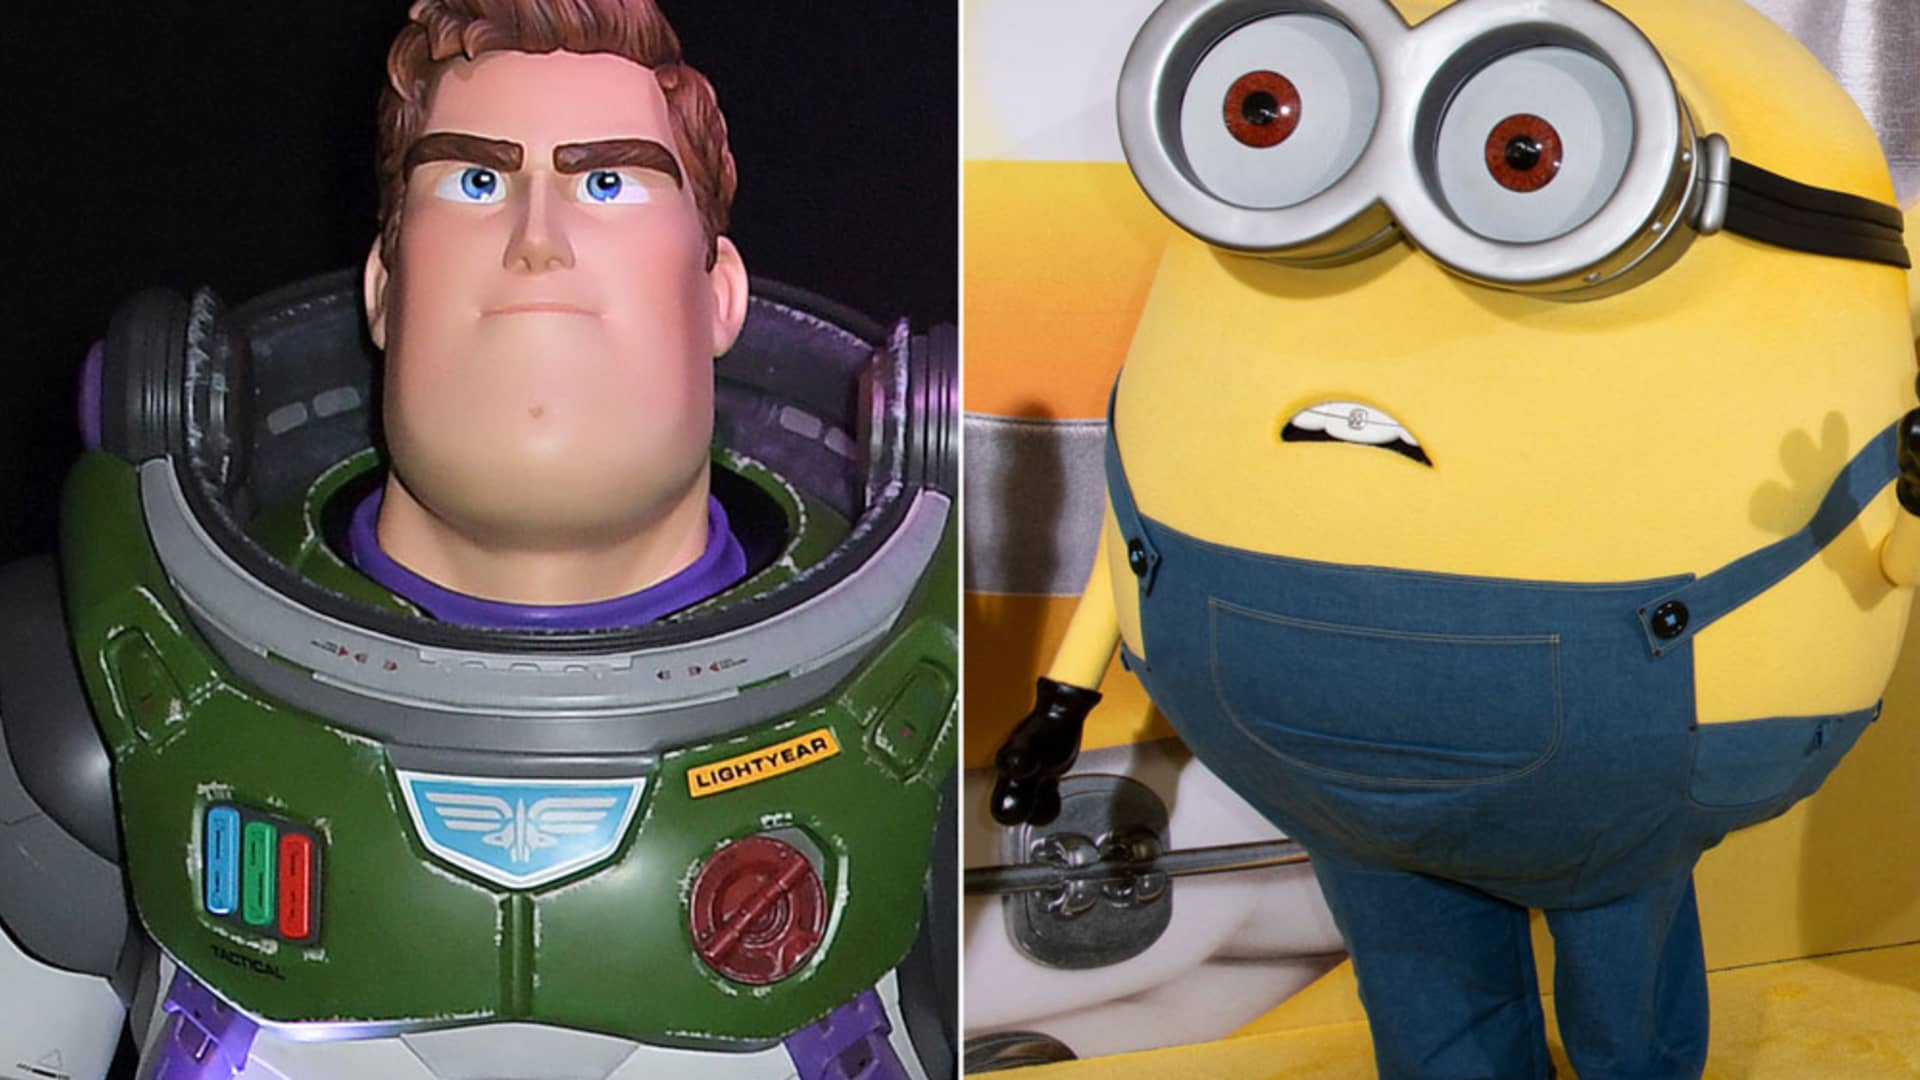 ‘Minions’ vs. ‘Lightyear:’ Here’s why the silly yellow blobs beat Buzz at the box office